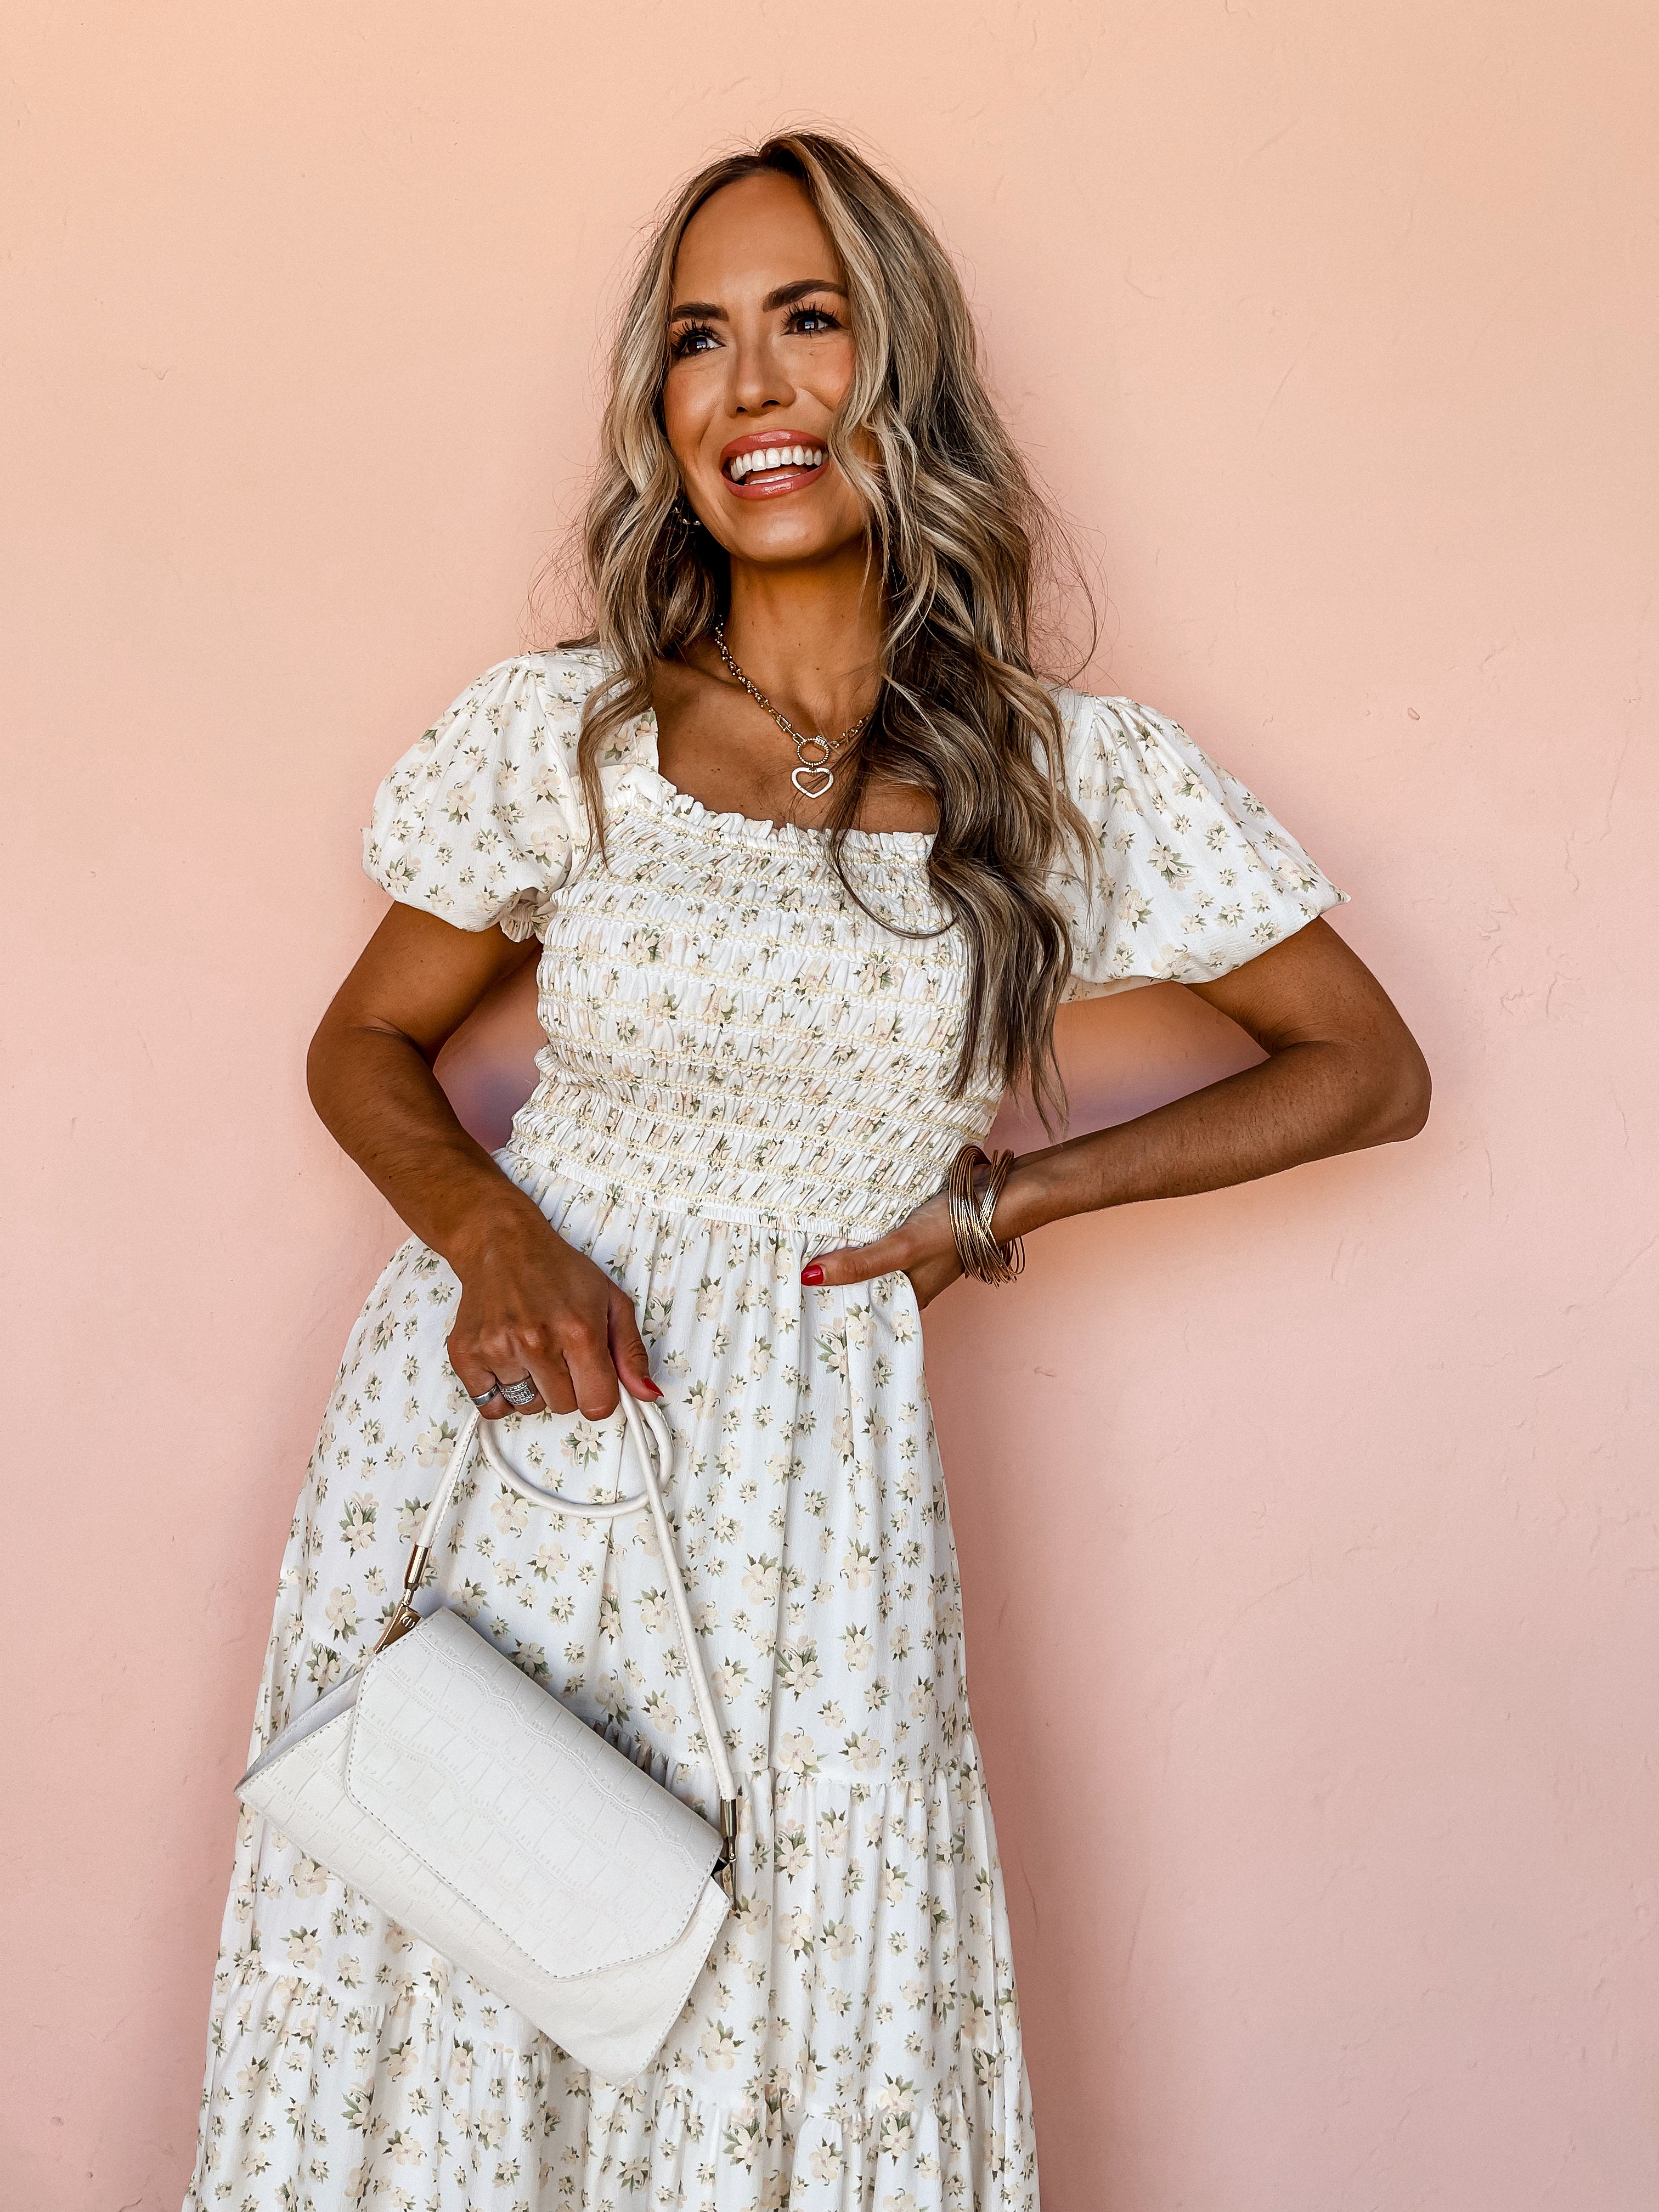 Plan For The Best Floral Maxi Dress